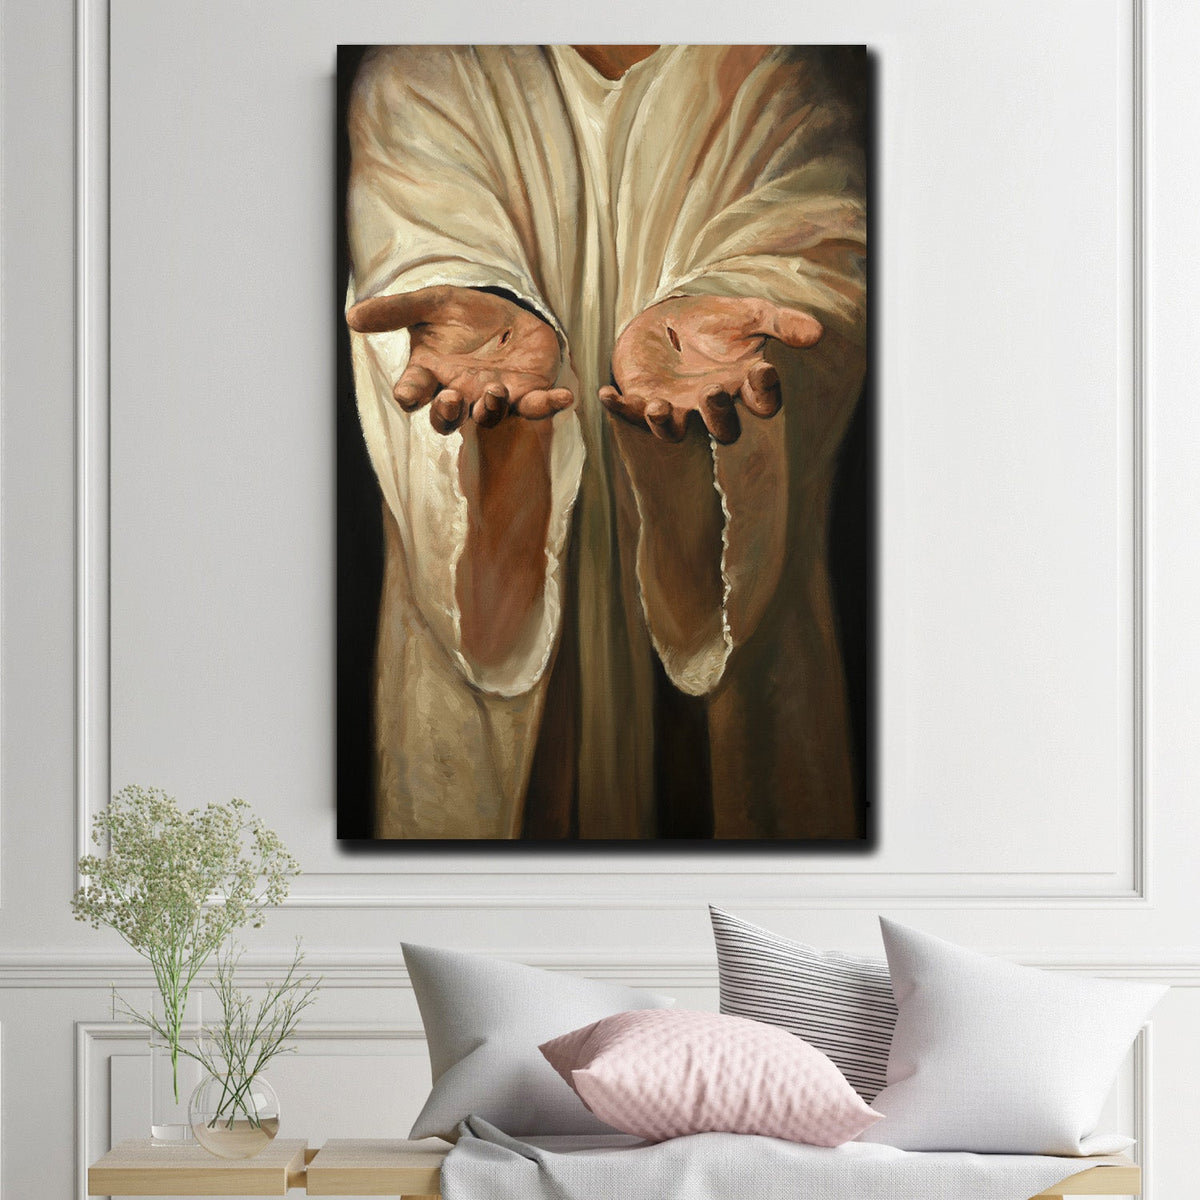 https://cdn.shopify.com/s/files/1/0387/9986/8044/products/TheHandsofJesusCanvasArtprintStretched-1.jpg